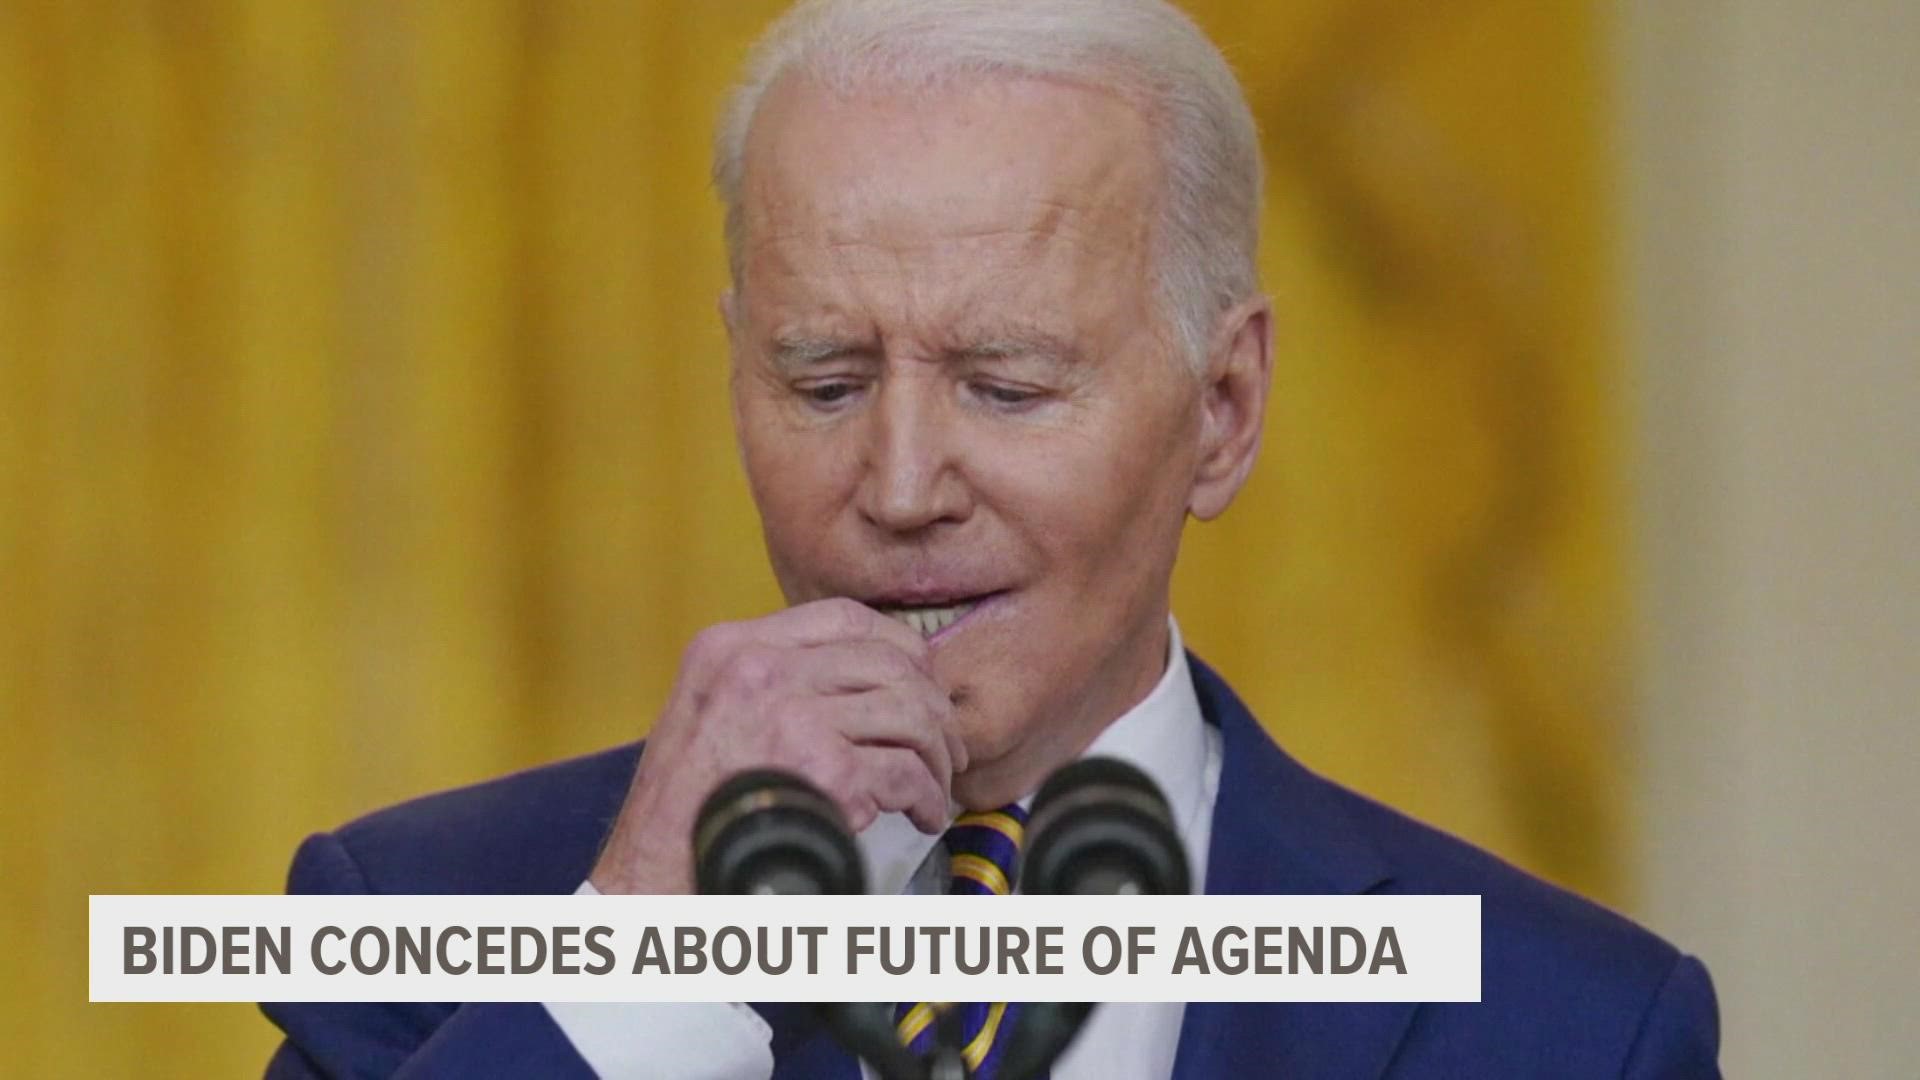 Biden said he didn't not overpromise, but that he's been caught off guard by Republicans' reluctance to come to the table.